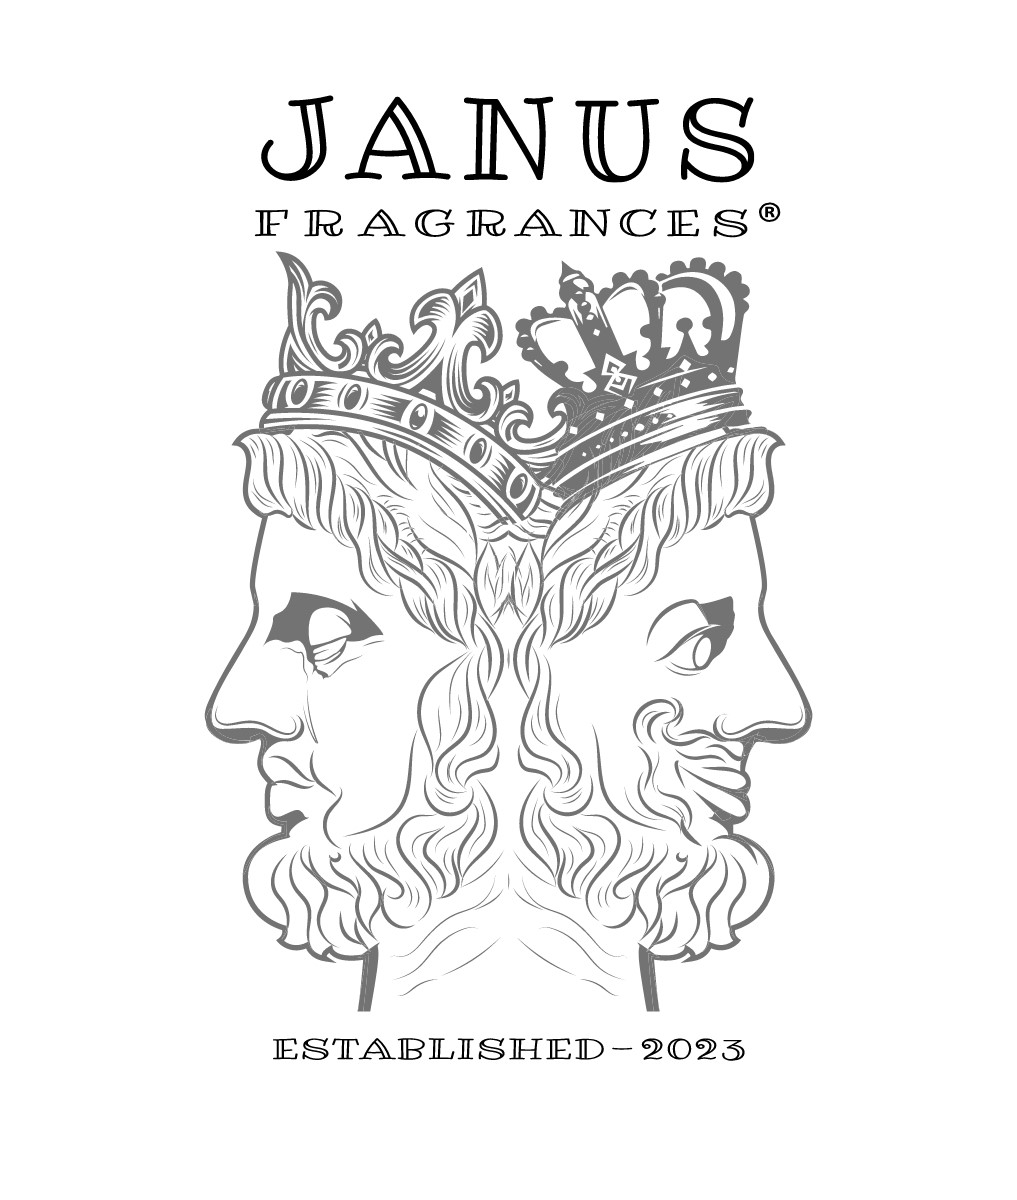 Janus Fragrances Sees Dream Turn to Fruition, Brings Affordable Perfume for All